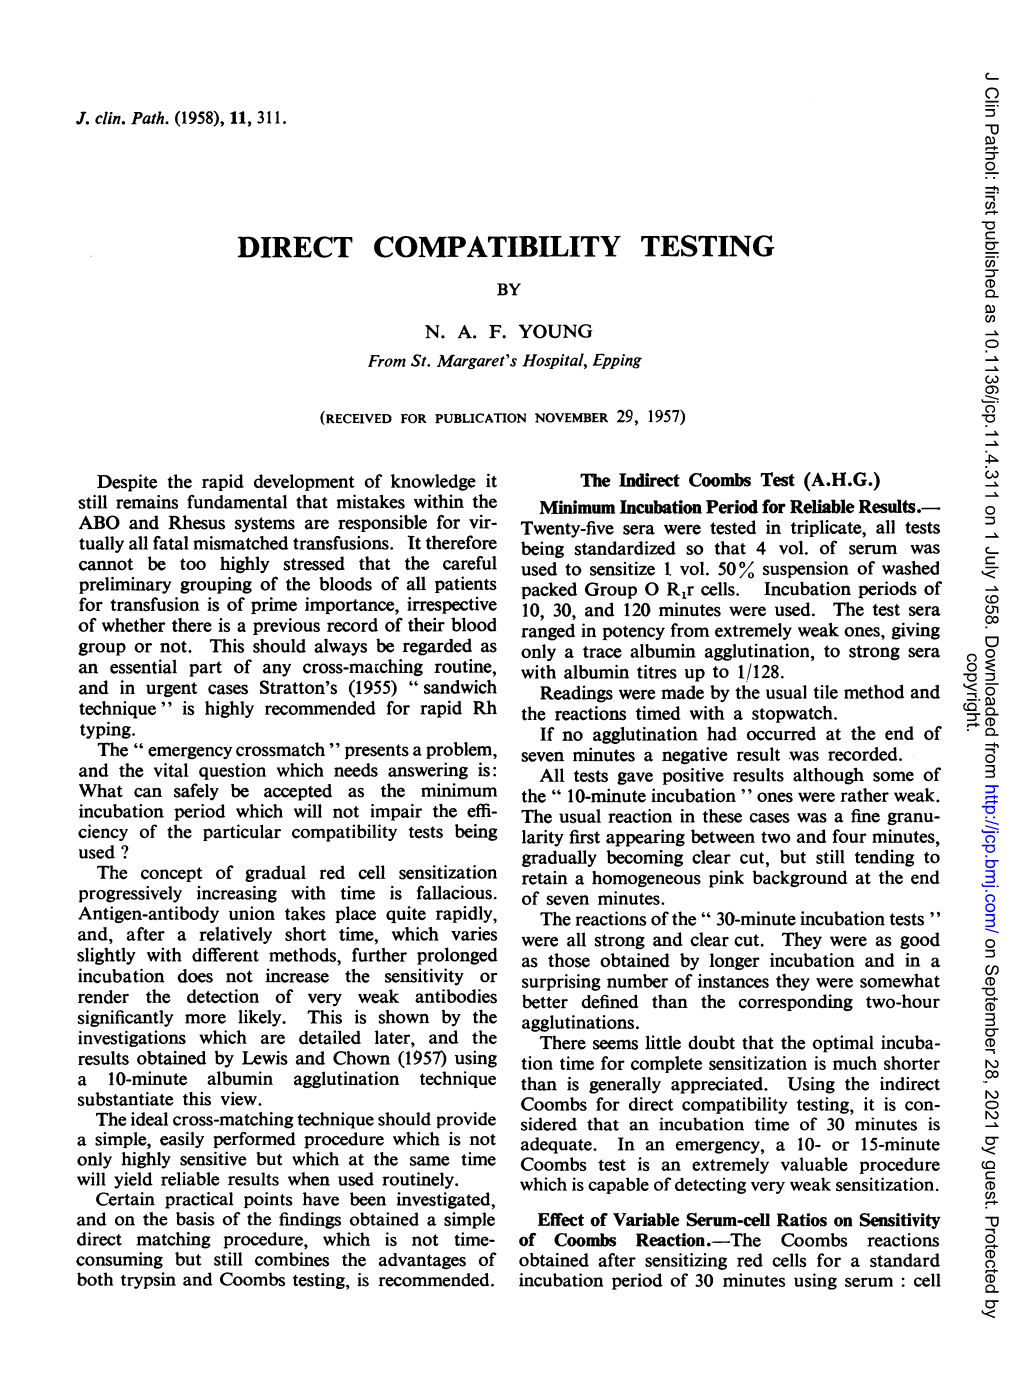 Direct Compatibility Testing by N